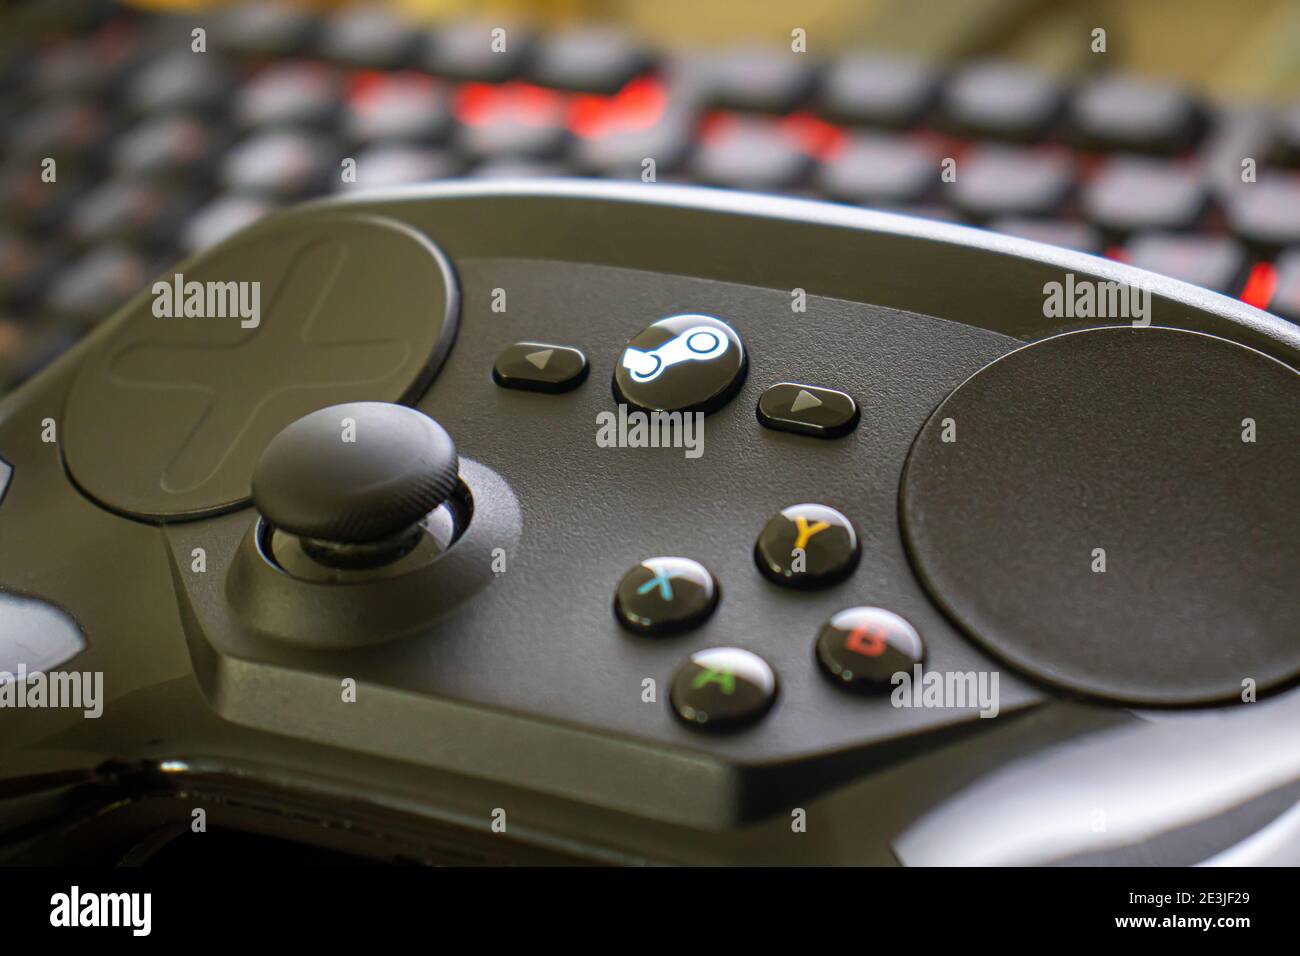 Steam Controller On A Red Illuminated Gaming Keyboard Stock Photo Alamy